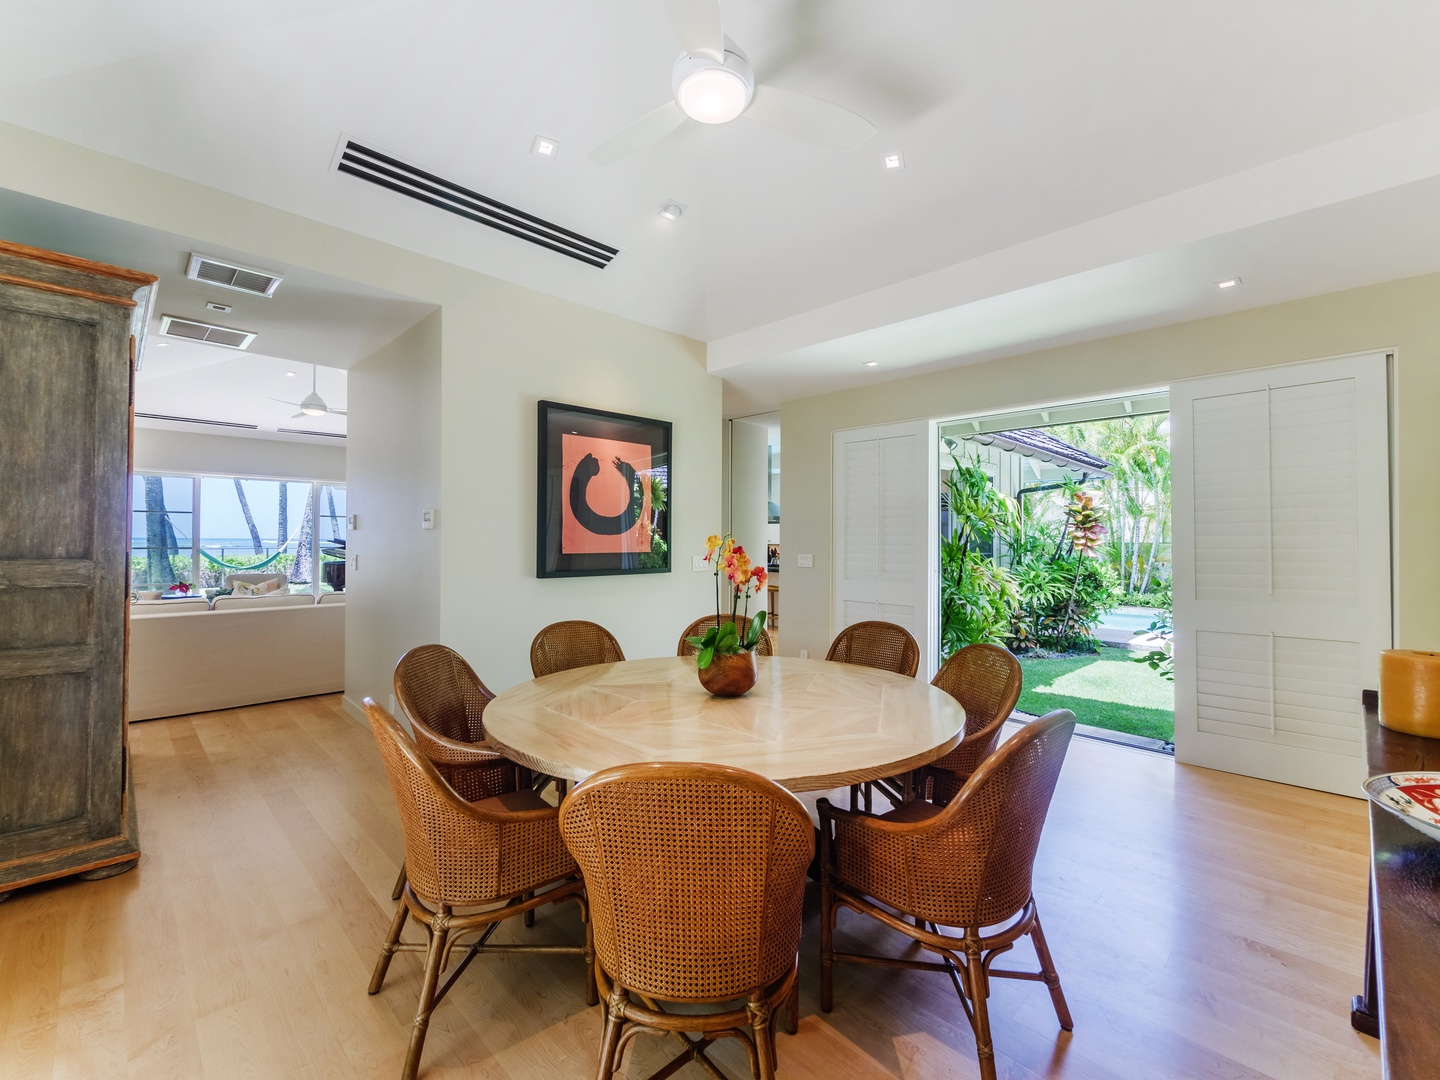 Honolulu Vacation Rentals, Paradise Beach Estate - Elegant dining table seating eight, seamlessly connecting to the outdoors for a refreshing dining experience amidst nature's embrace.